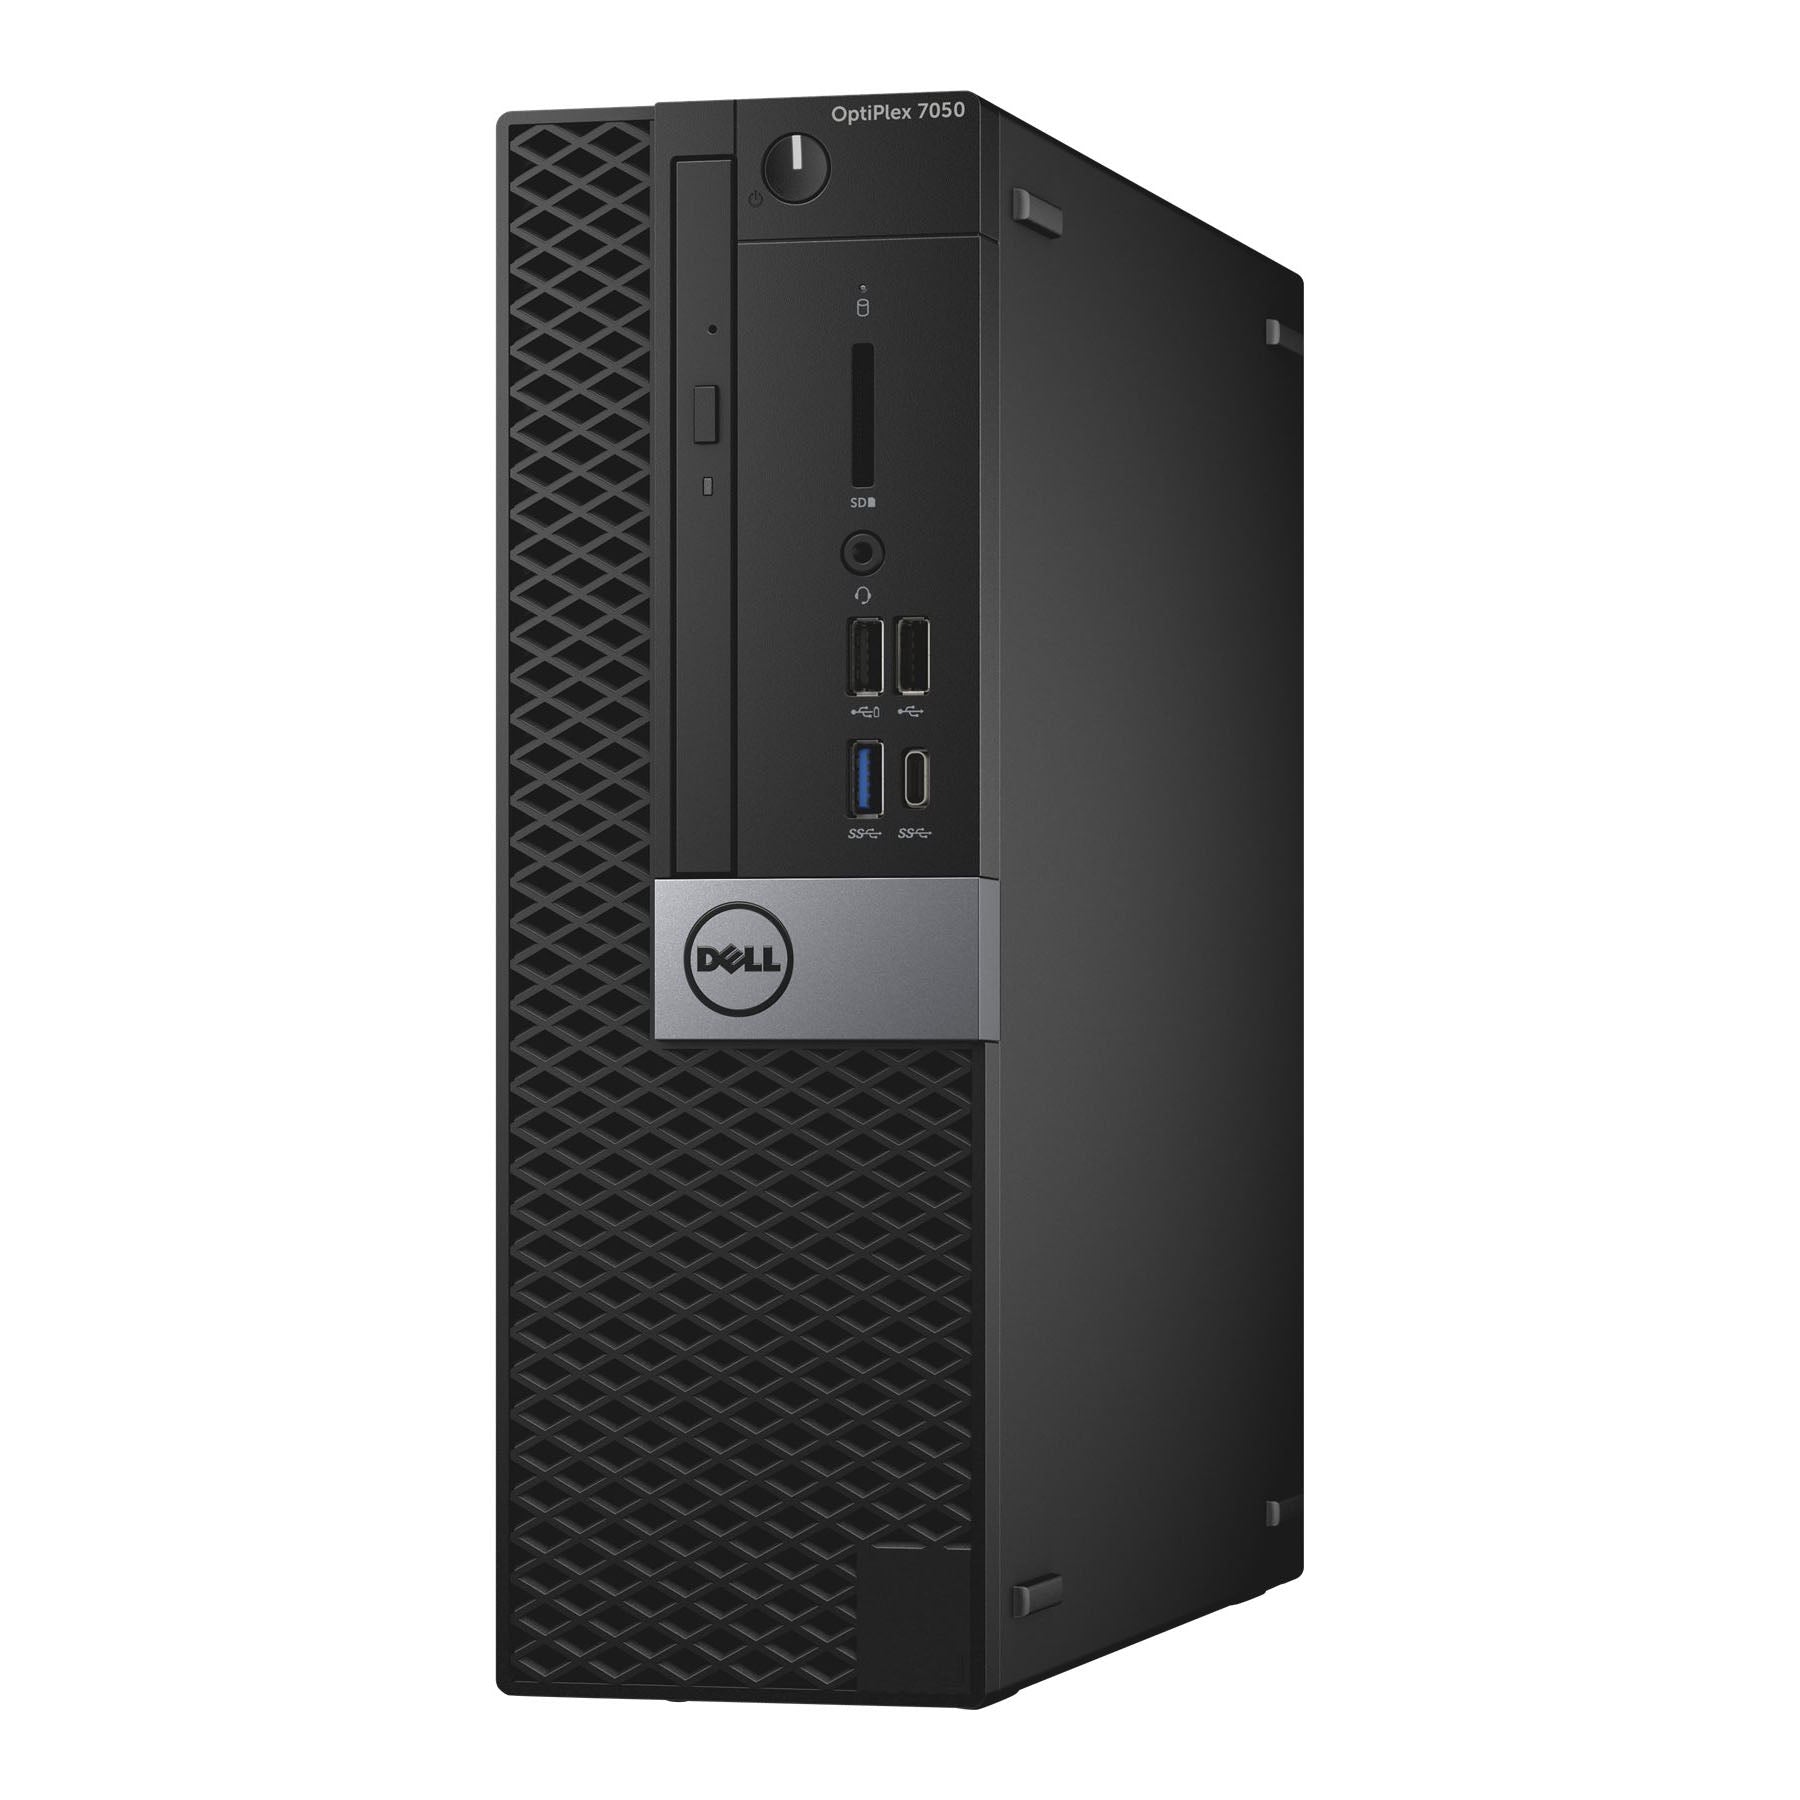 Discount PC - front-right angle view of the Dell Optiplex 7050 i5 Small Form Factor Desktop